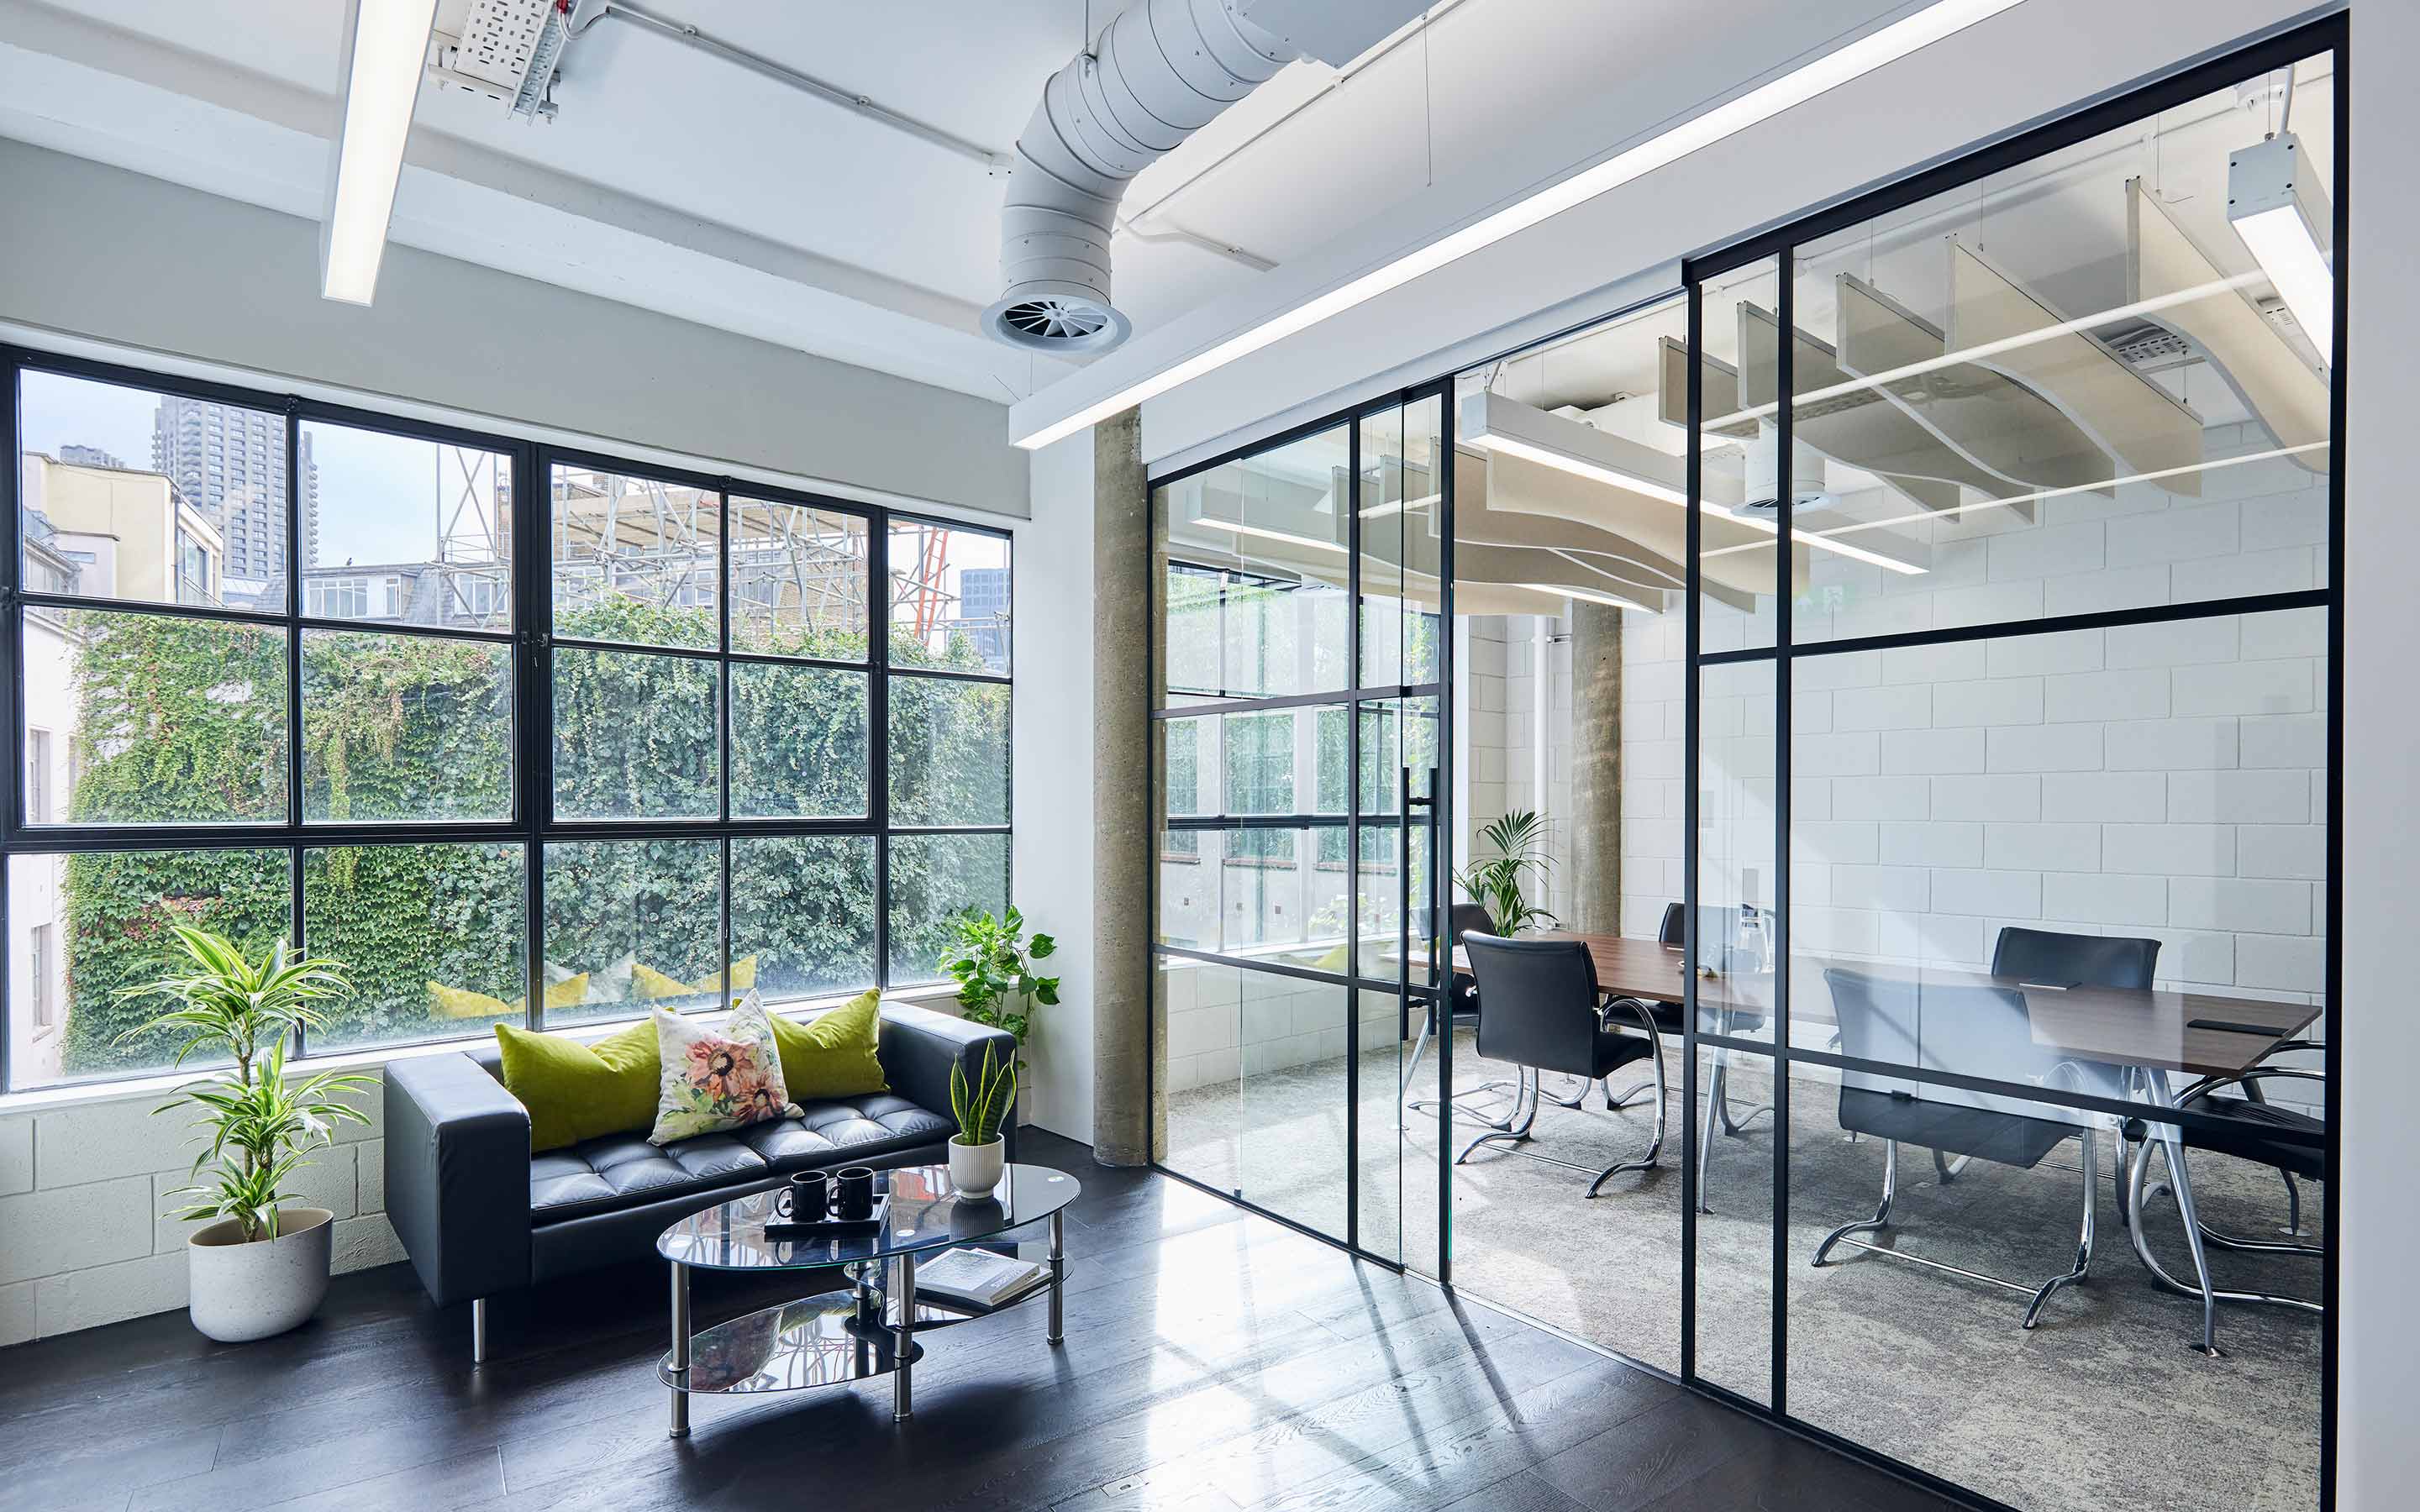 The image shows a glass-walled meeting room and a soft seating area in an office flooded with natural light